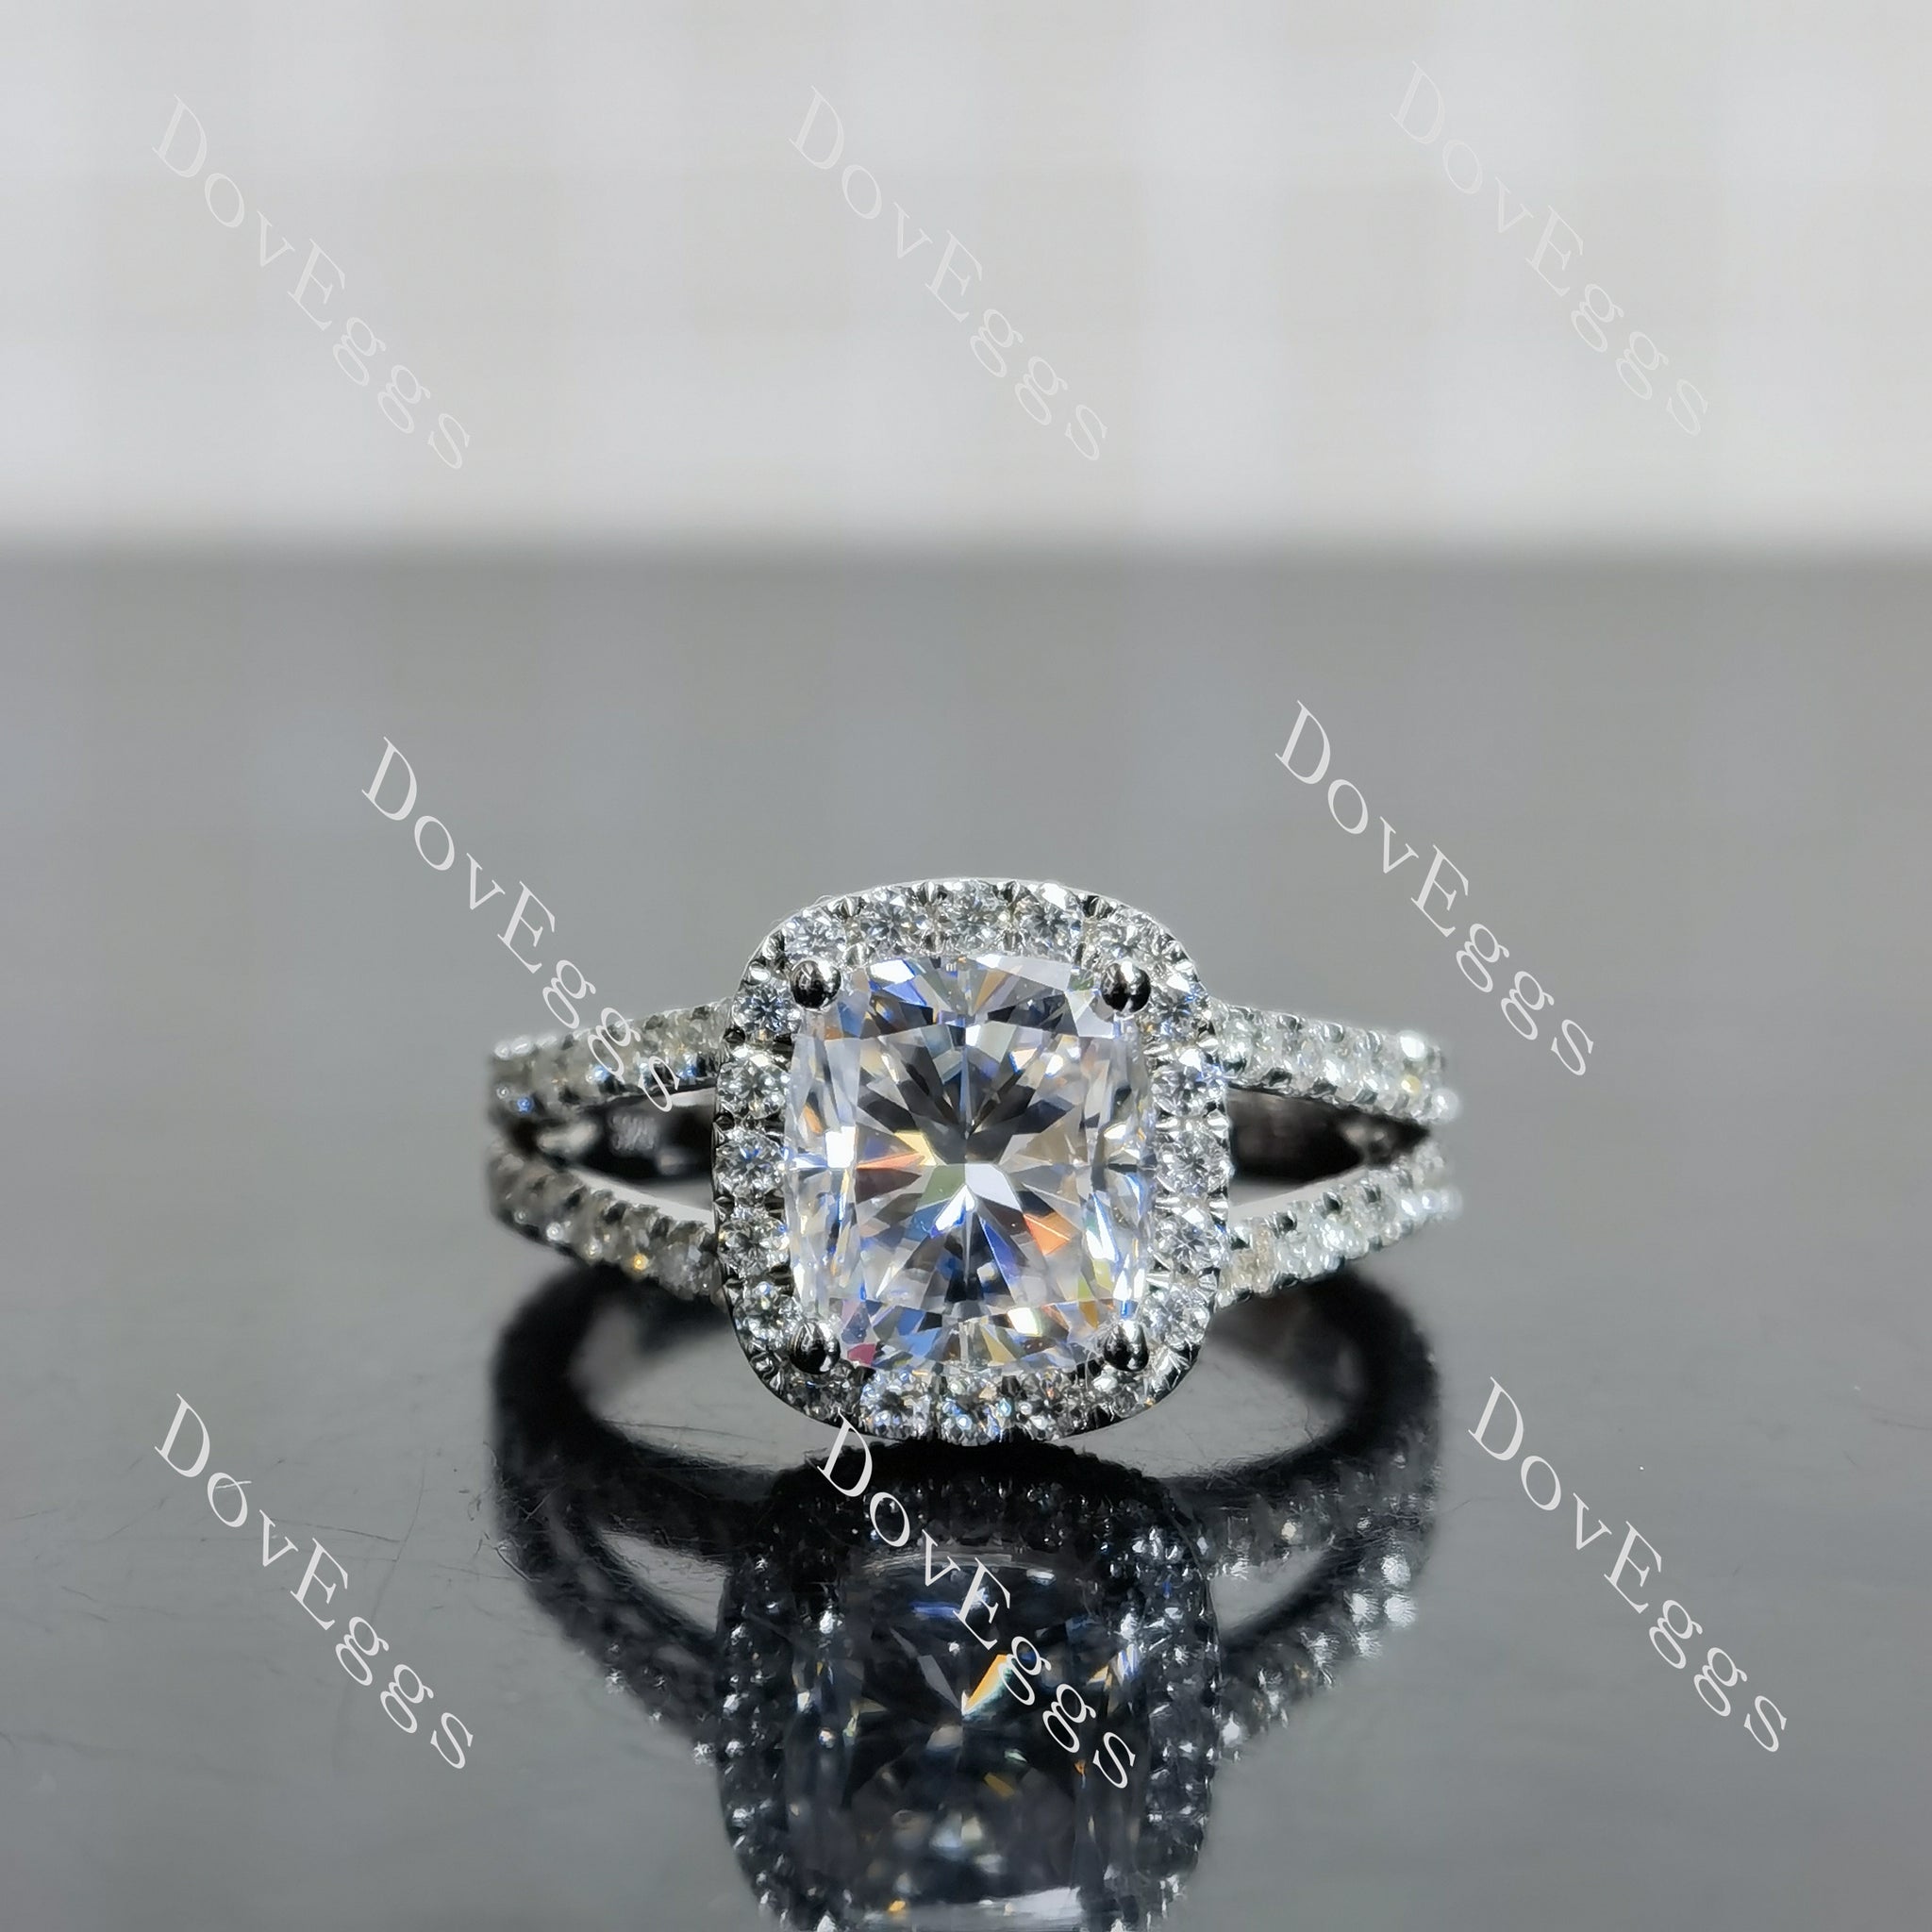 Doveggs cushion halo split shank pave moissanite engagement ring(engagement ring only)